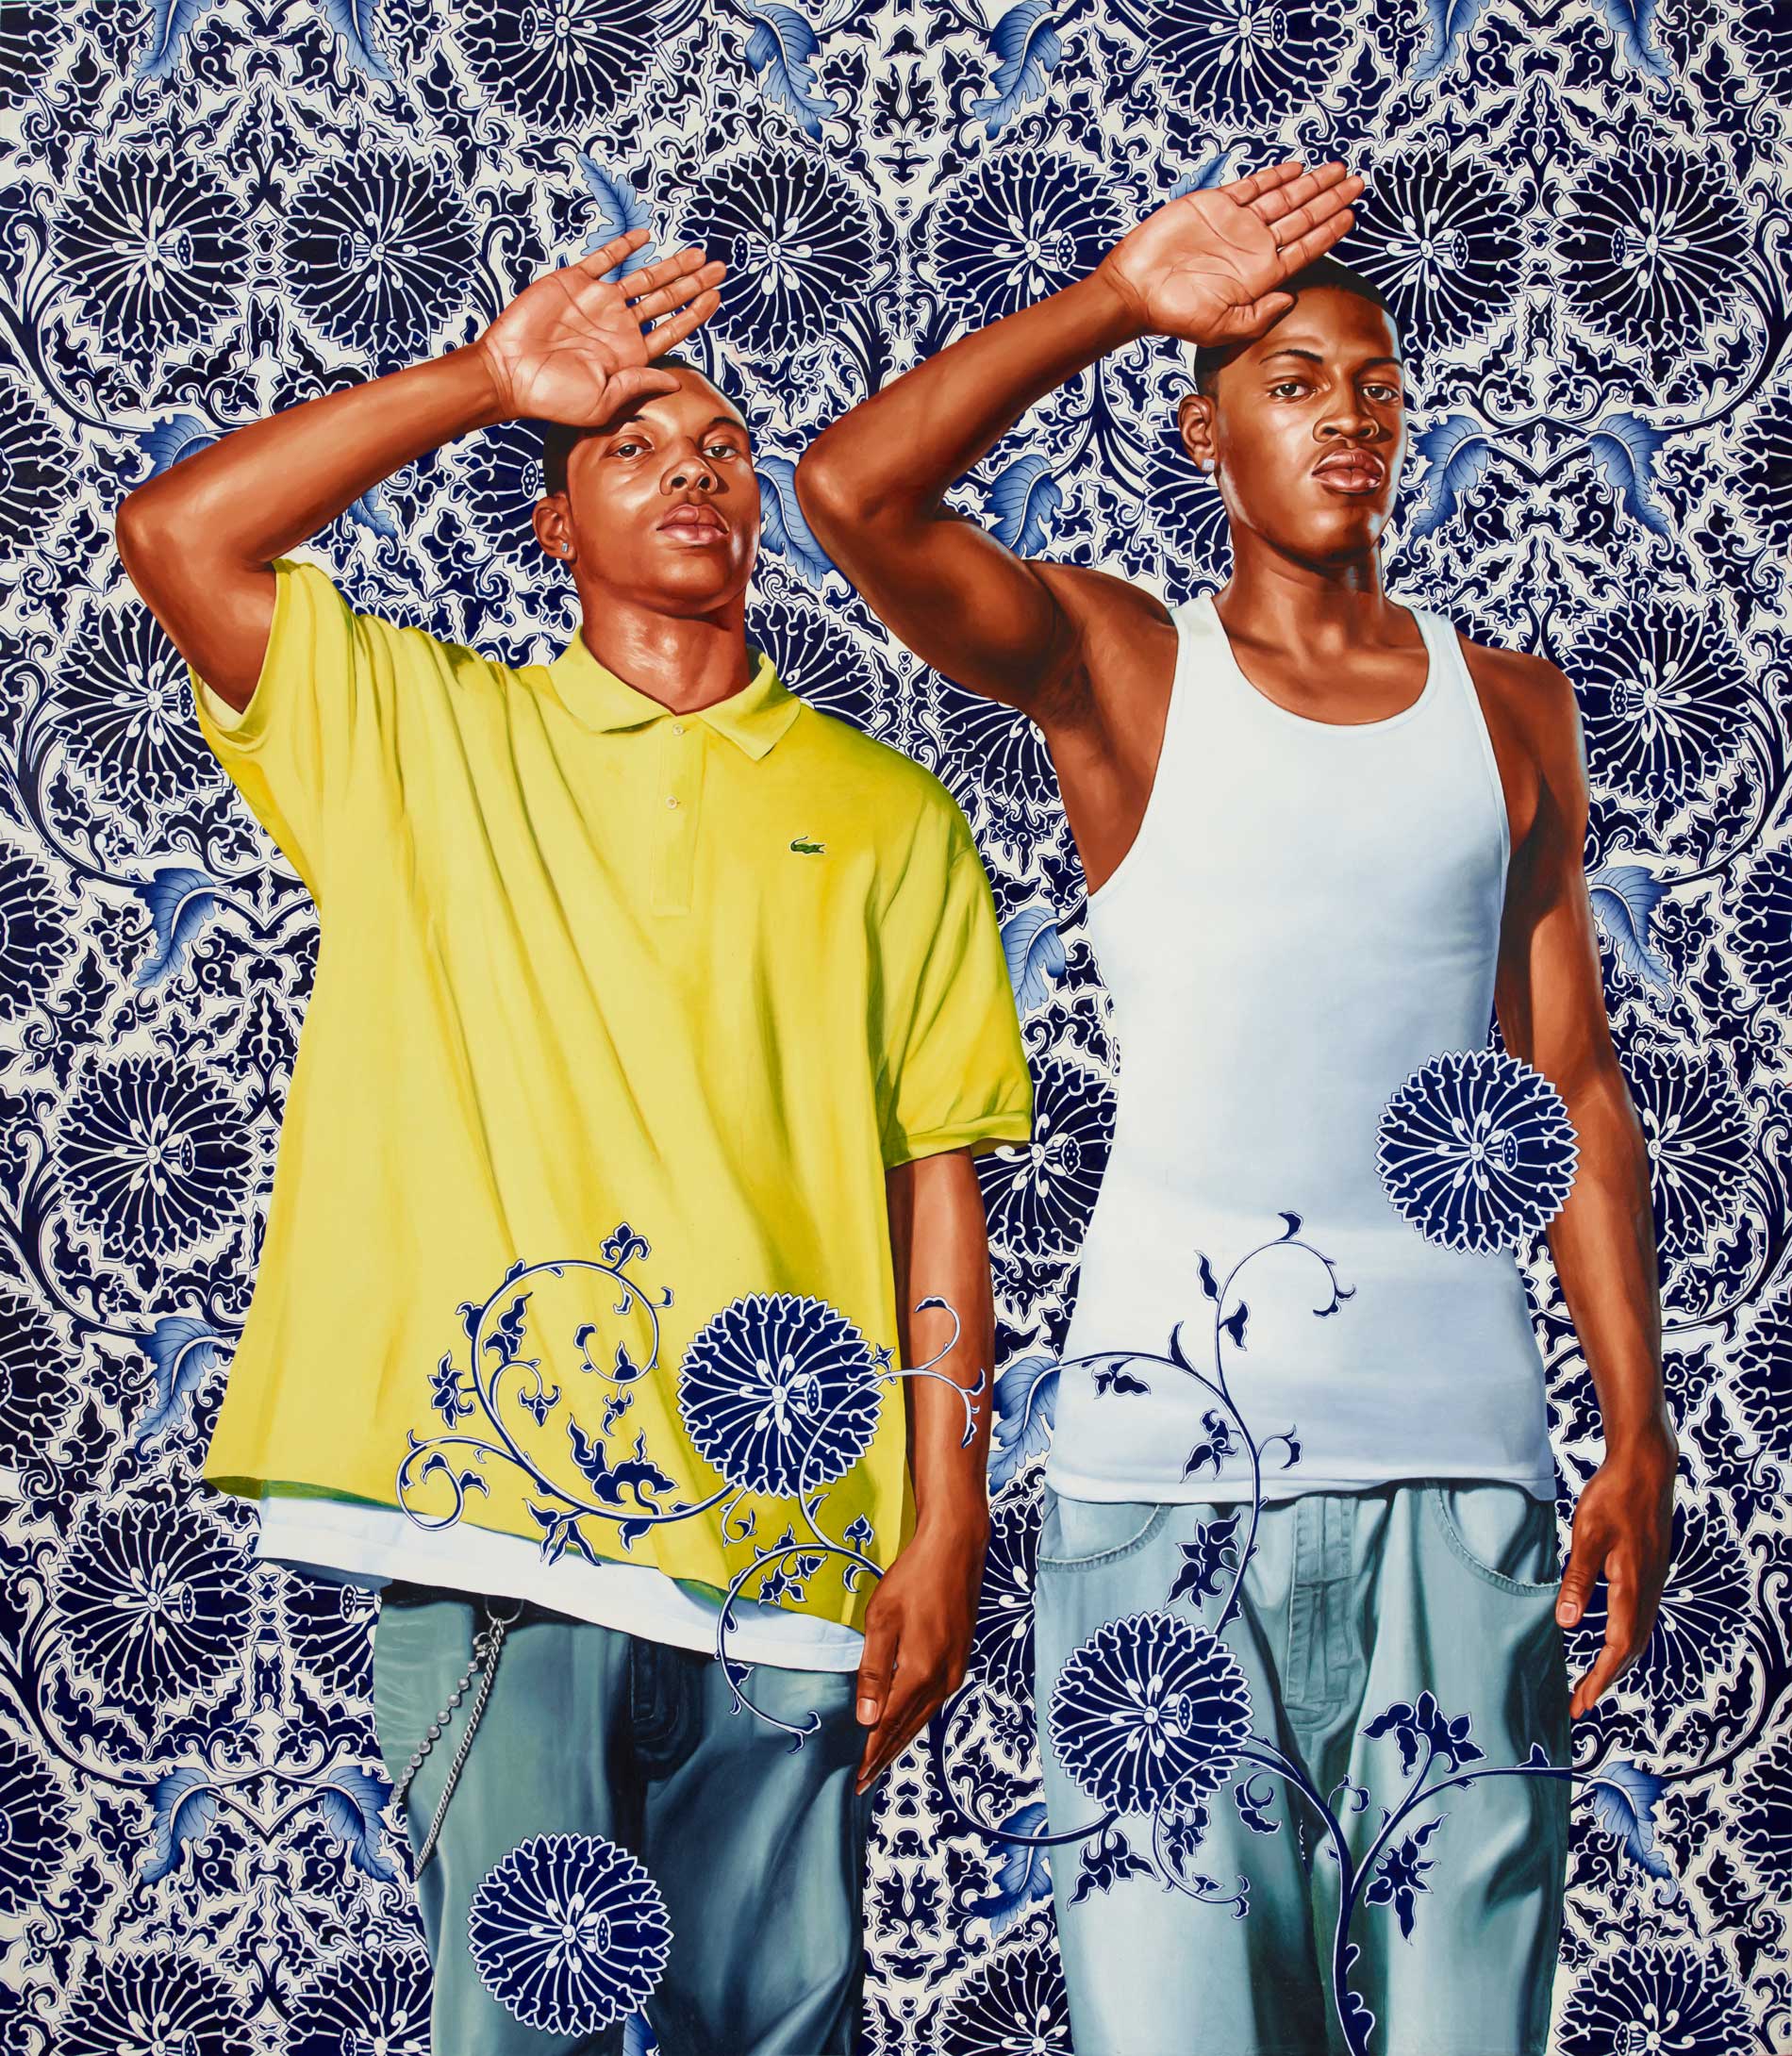 Kehinde Wiley | A New Republic, Brooklyn Museum, New York City, USA,  February 20- May 24, 2015 | Two Heroic Sisters of the Grassland, 2011 Oil on Canvas. | 21